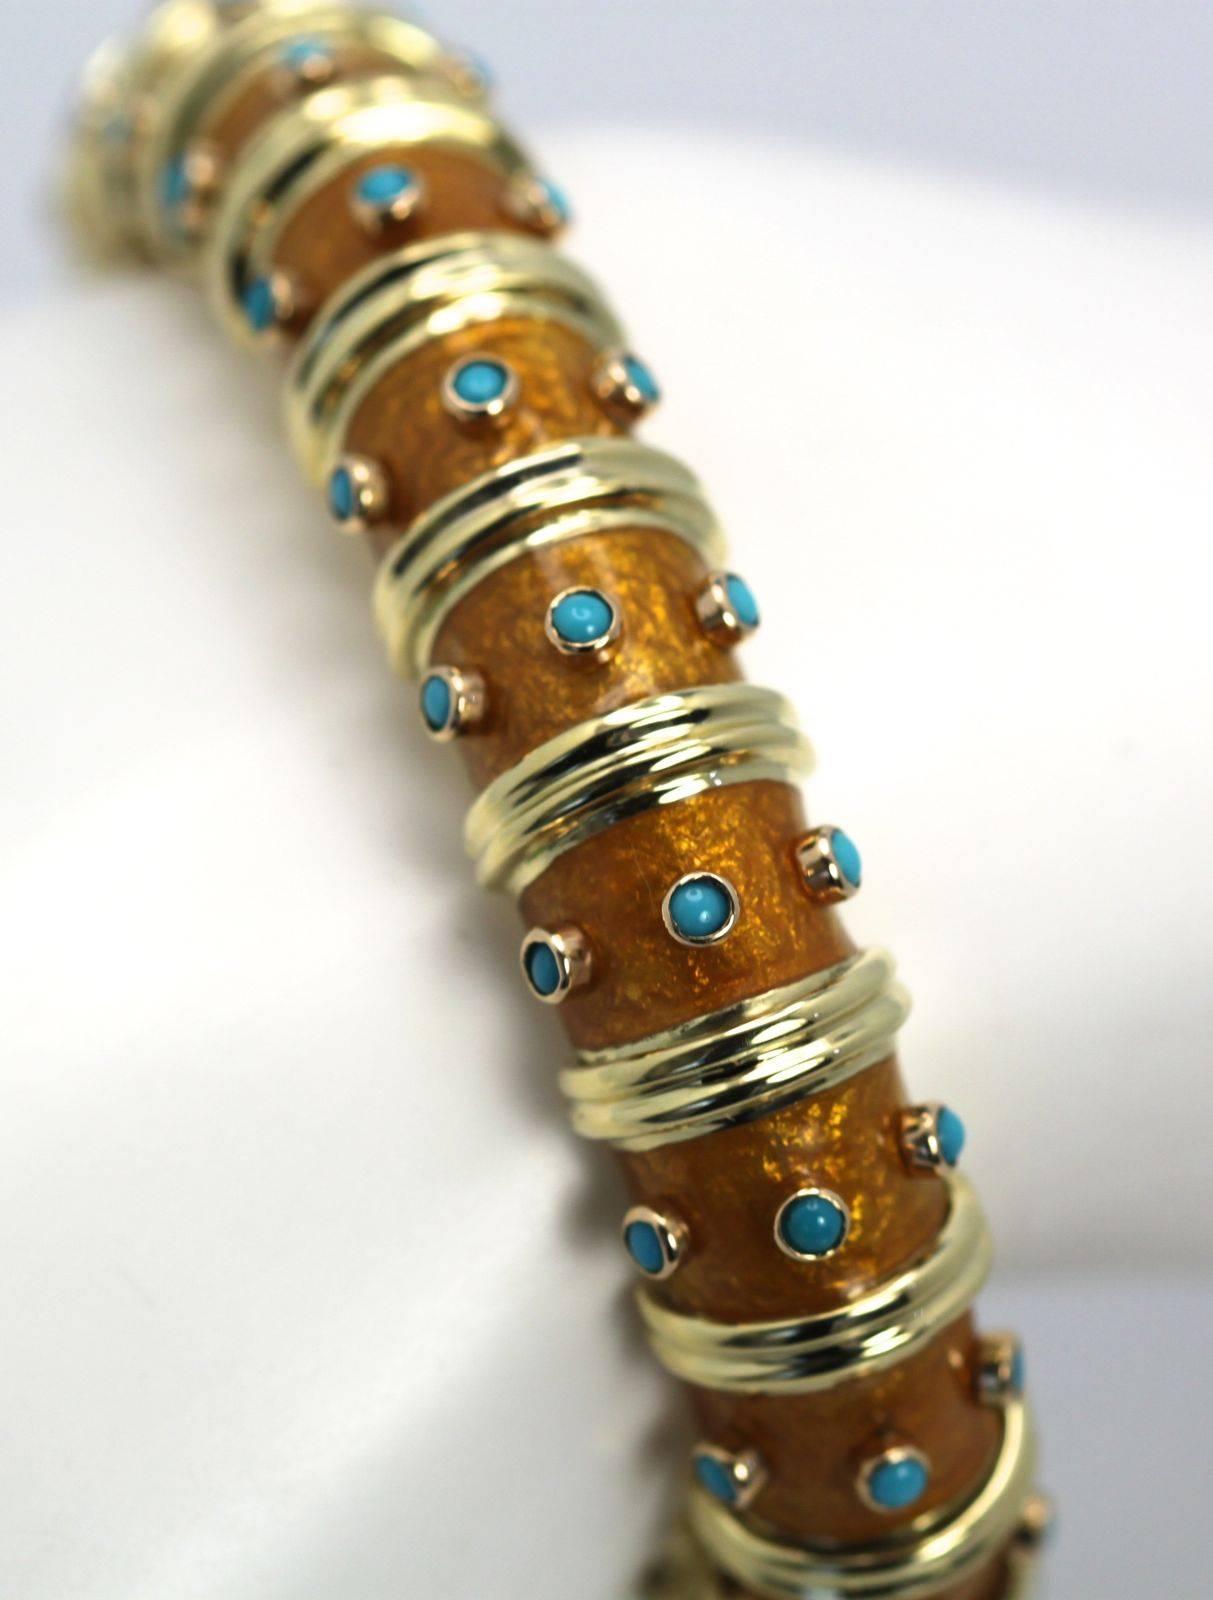 This iconic Bracelet from Tiffany is by no other than Jean Schlumberger. This bracelet is iconic expensive and hard to find. Many of his other enamel bracelets are easier to find but these with Turquoise or Coral are very rare. This has been worn